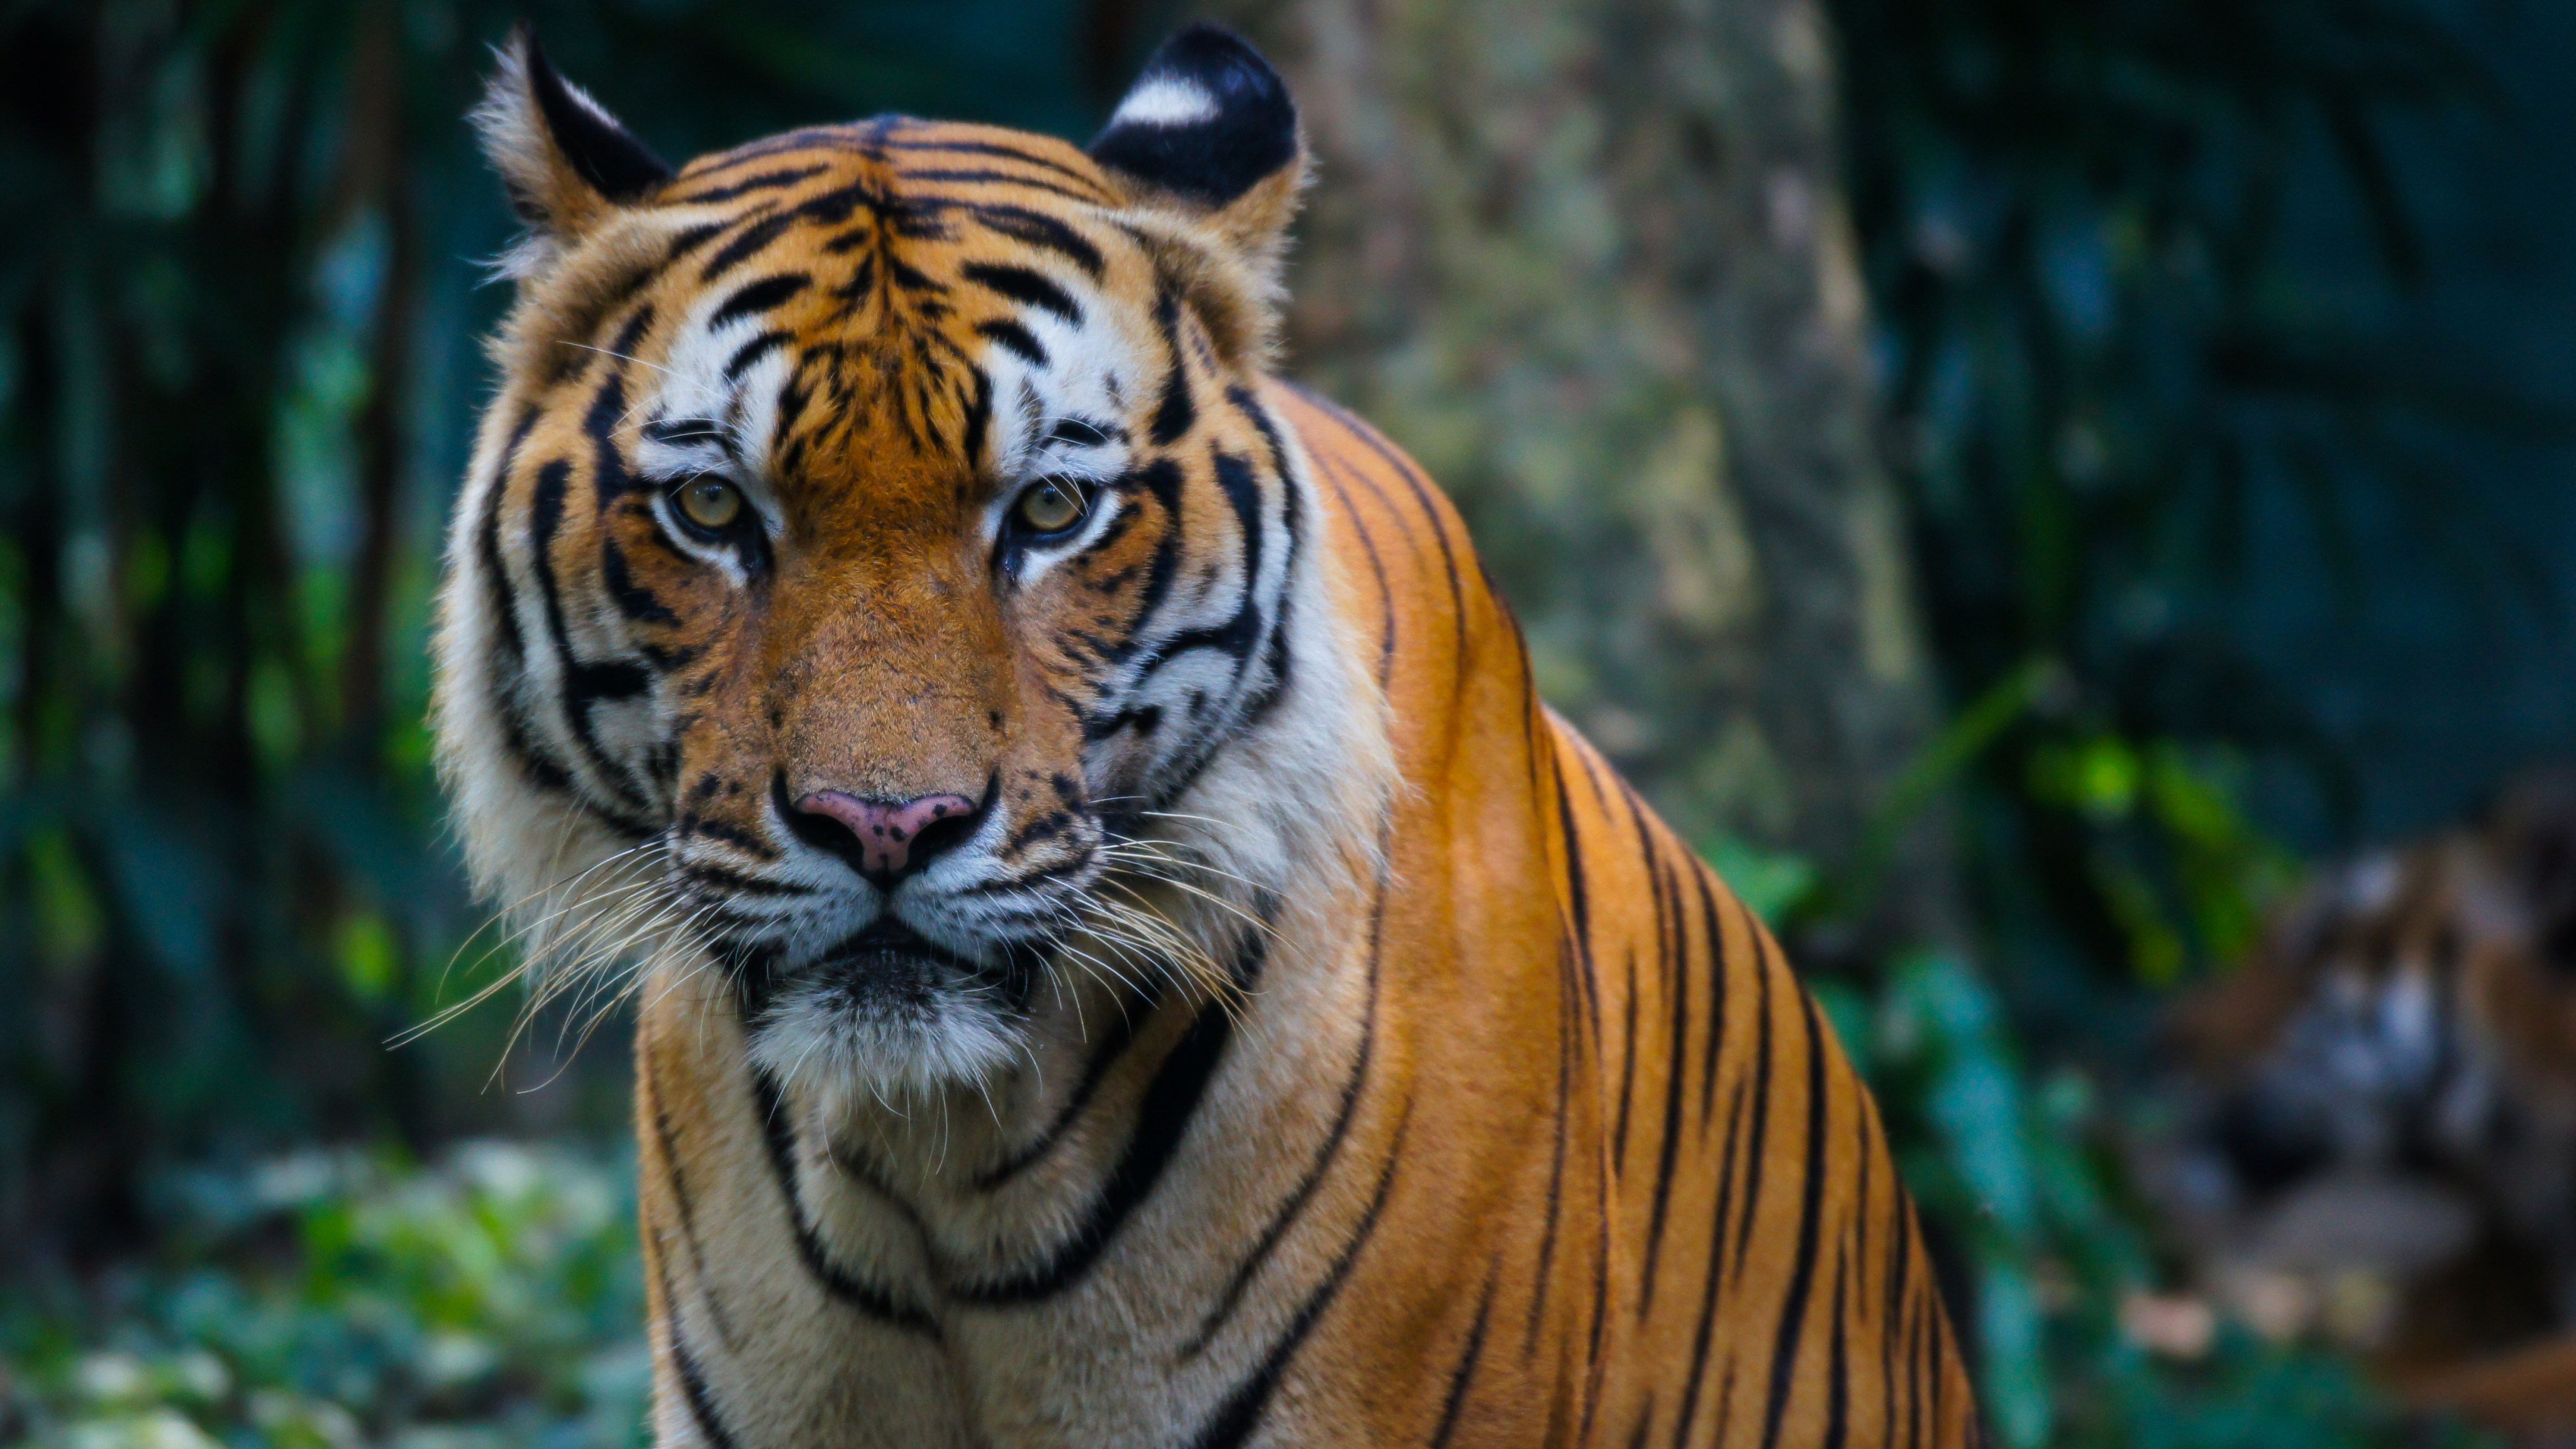 The Malayan tiger subspecies is the national animal of Malaysia, appearing on the country’s coat of arms. Photo: Shutterstock